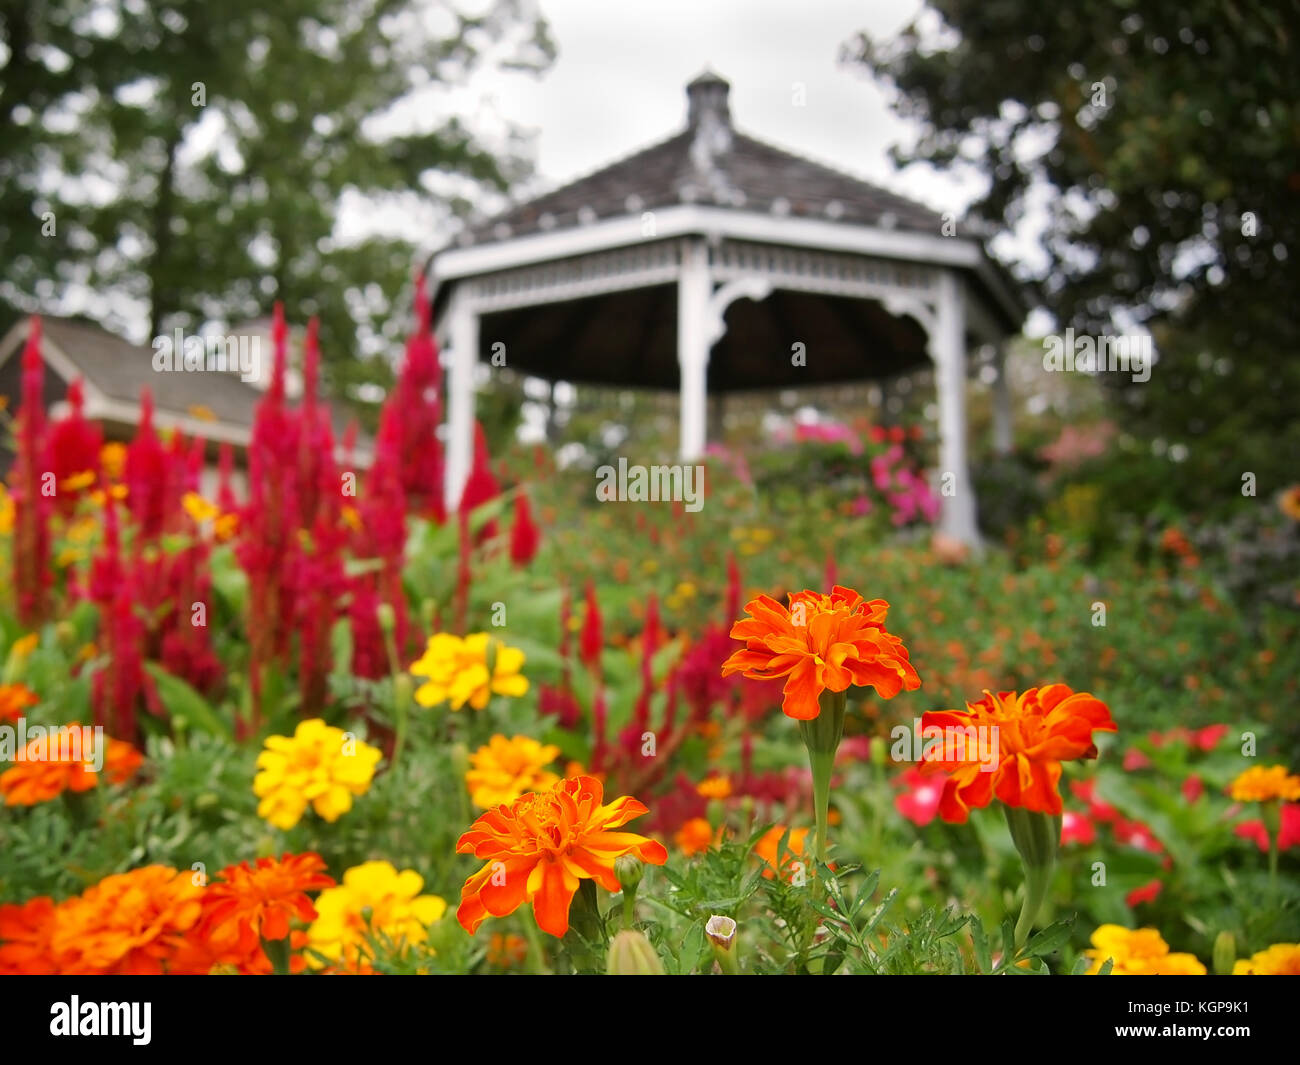 A trio of brilliant orange Marigold flowers stand perkily in the midst of a colorful flower garden with a whimsical gazebo in the background. Stock Photo